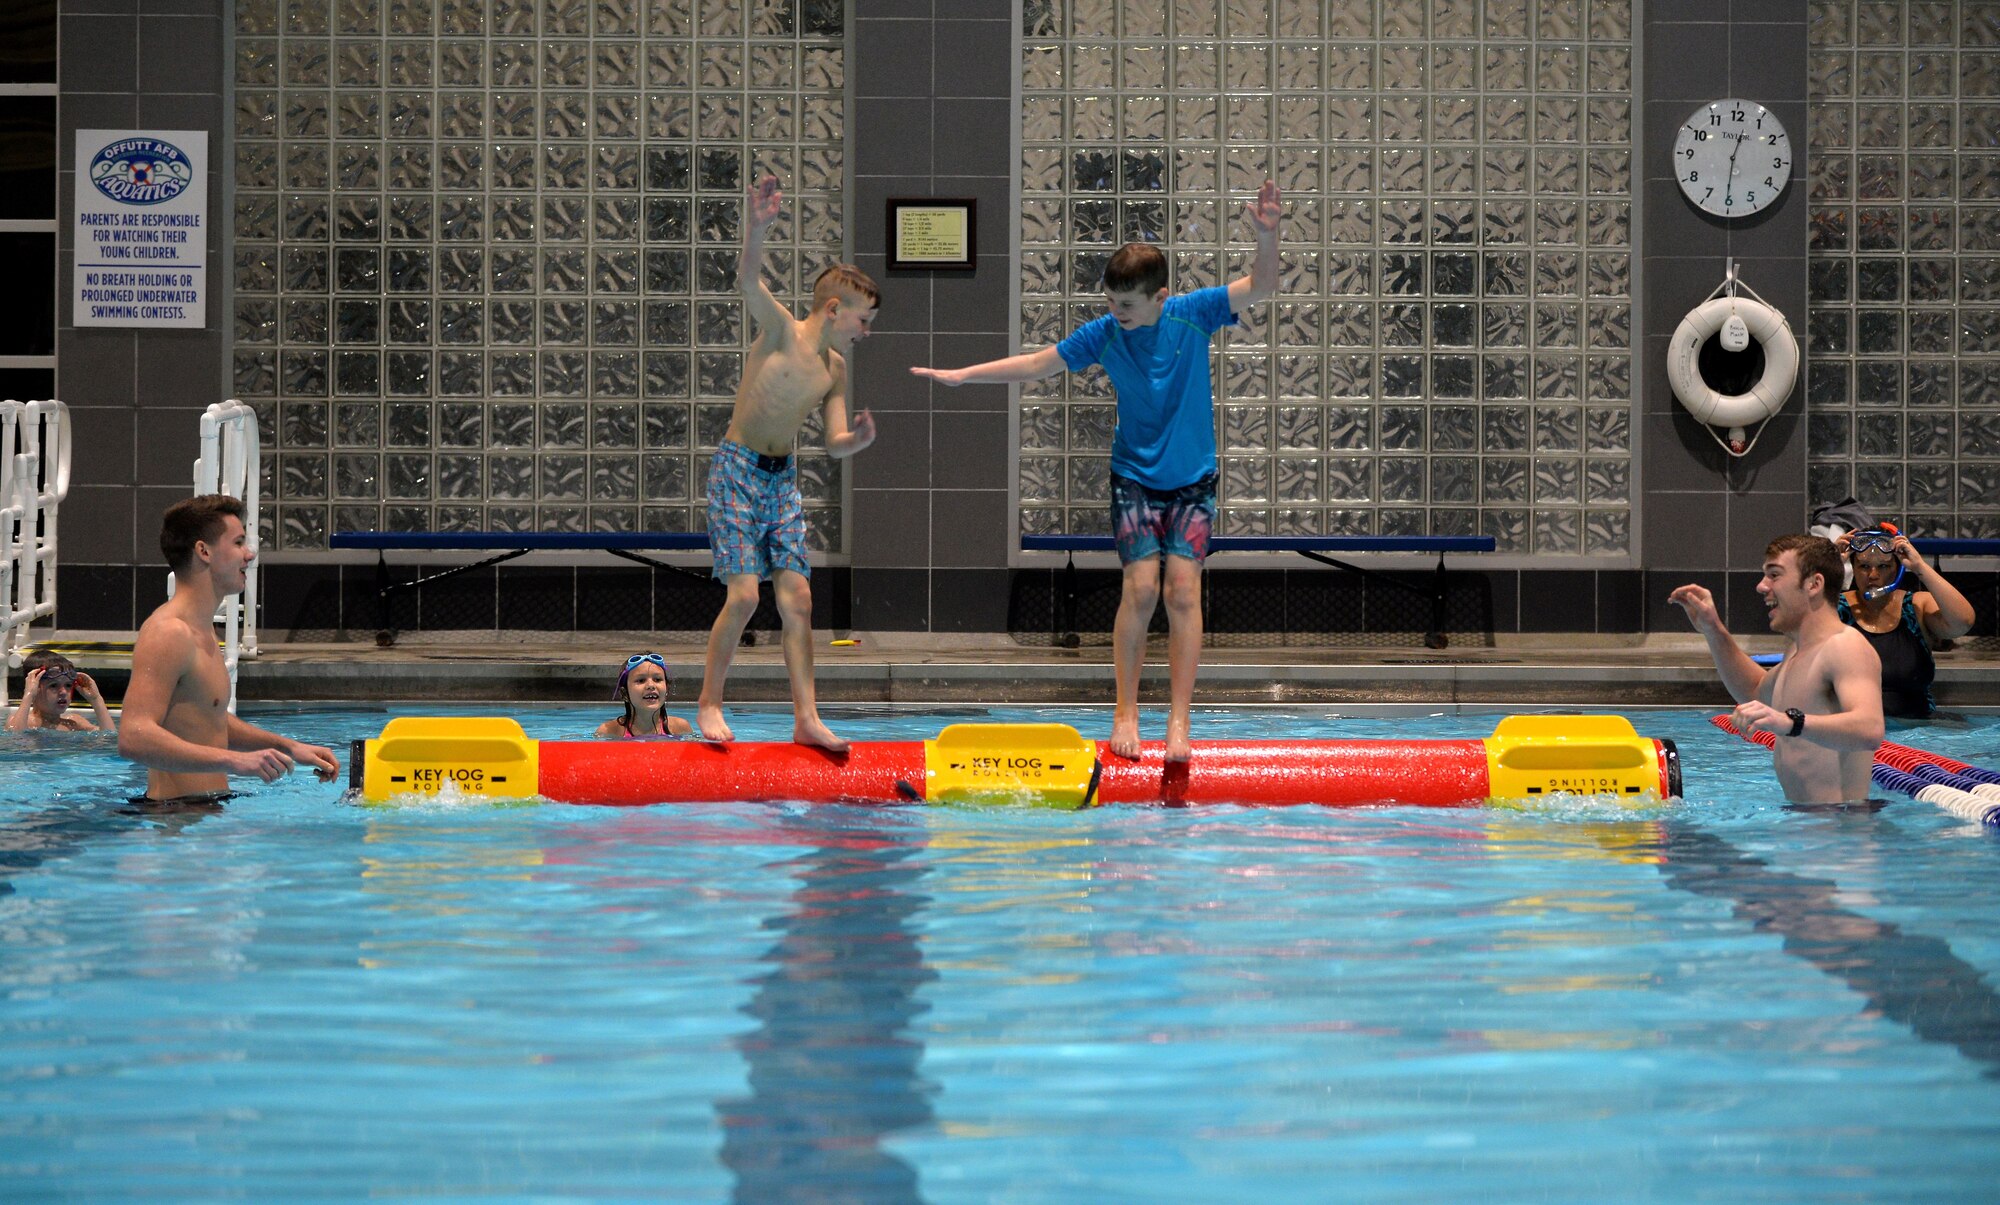 Luke Iverson and his brother Lane, sons of Master Sgt. Mike Iverson, 55th Security Forces Squadron flight chief, compete with one another to be the last sibling standing on the Key Log at the base lap-pool located in the Offutt Field House on Jan. 13, 2018.